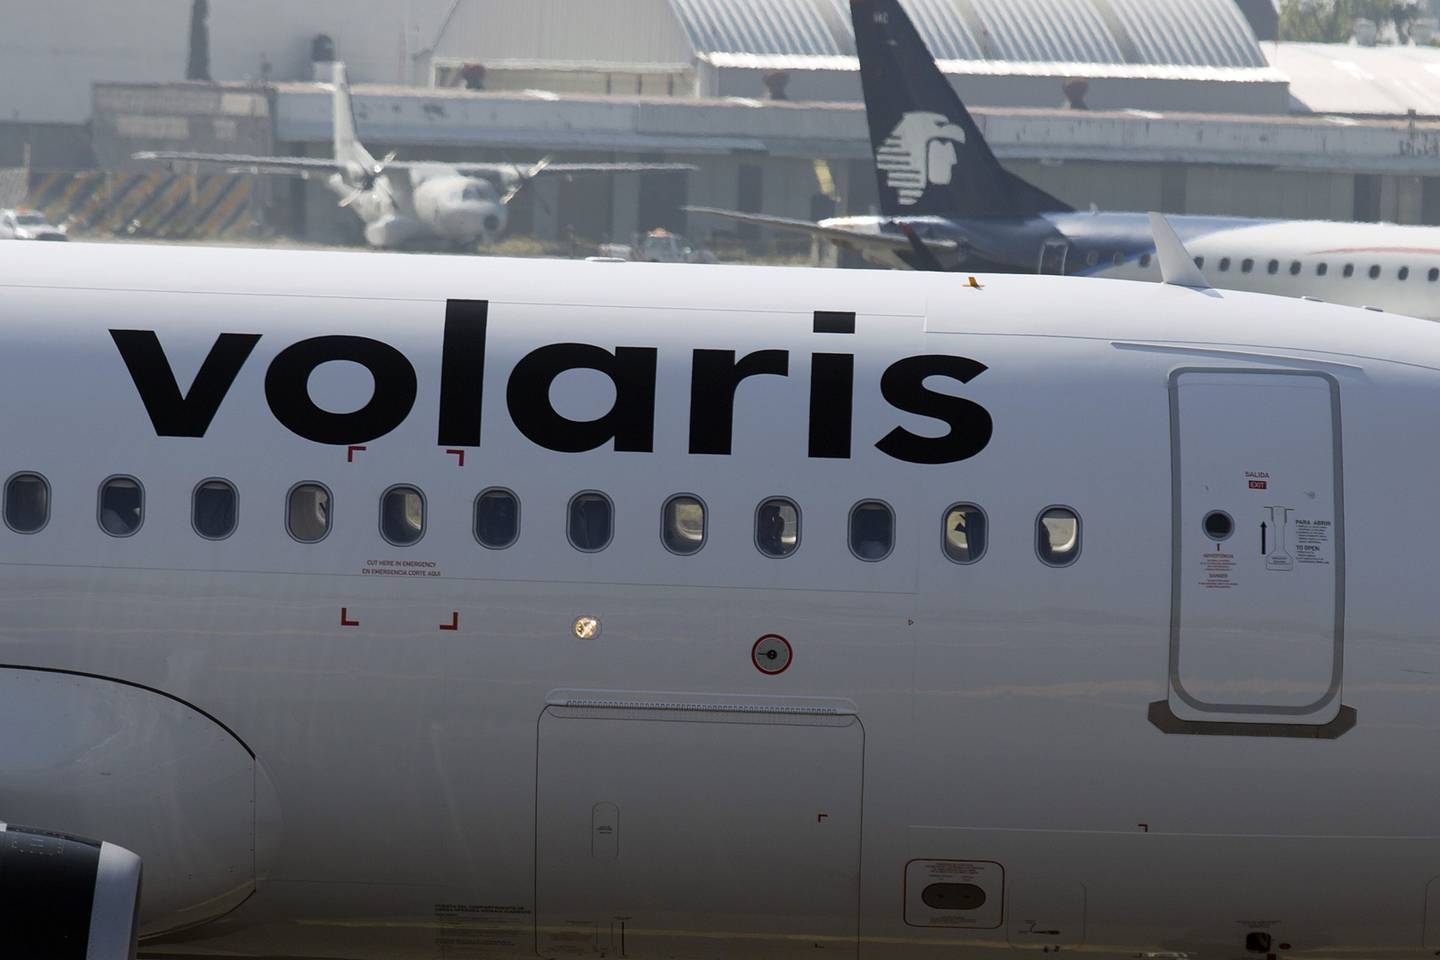 The tail section of a Grupo Aeromexico SAB jet is seen behind a Volaris plane at Benito Juarez International Airport in Mexico City, Mexico, on Tuesday, Sept. 17, 2013. Volaris, the low-cost Mexican airline backed by U.S. private-equity firm Indigo Partners LLC, is touting market-share growth to potential investors in its initial share sale as the value of its public peer languishes. Photographer: Susana Gonzalez/Bloombergdfd